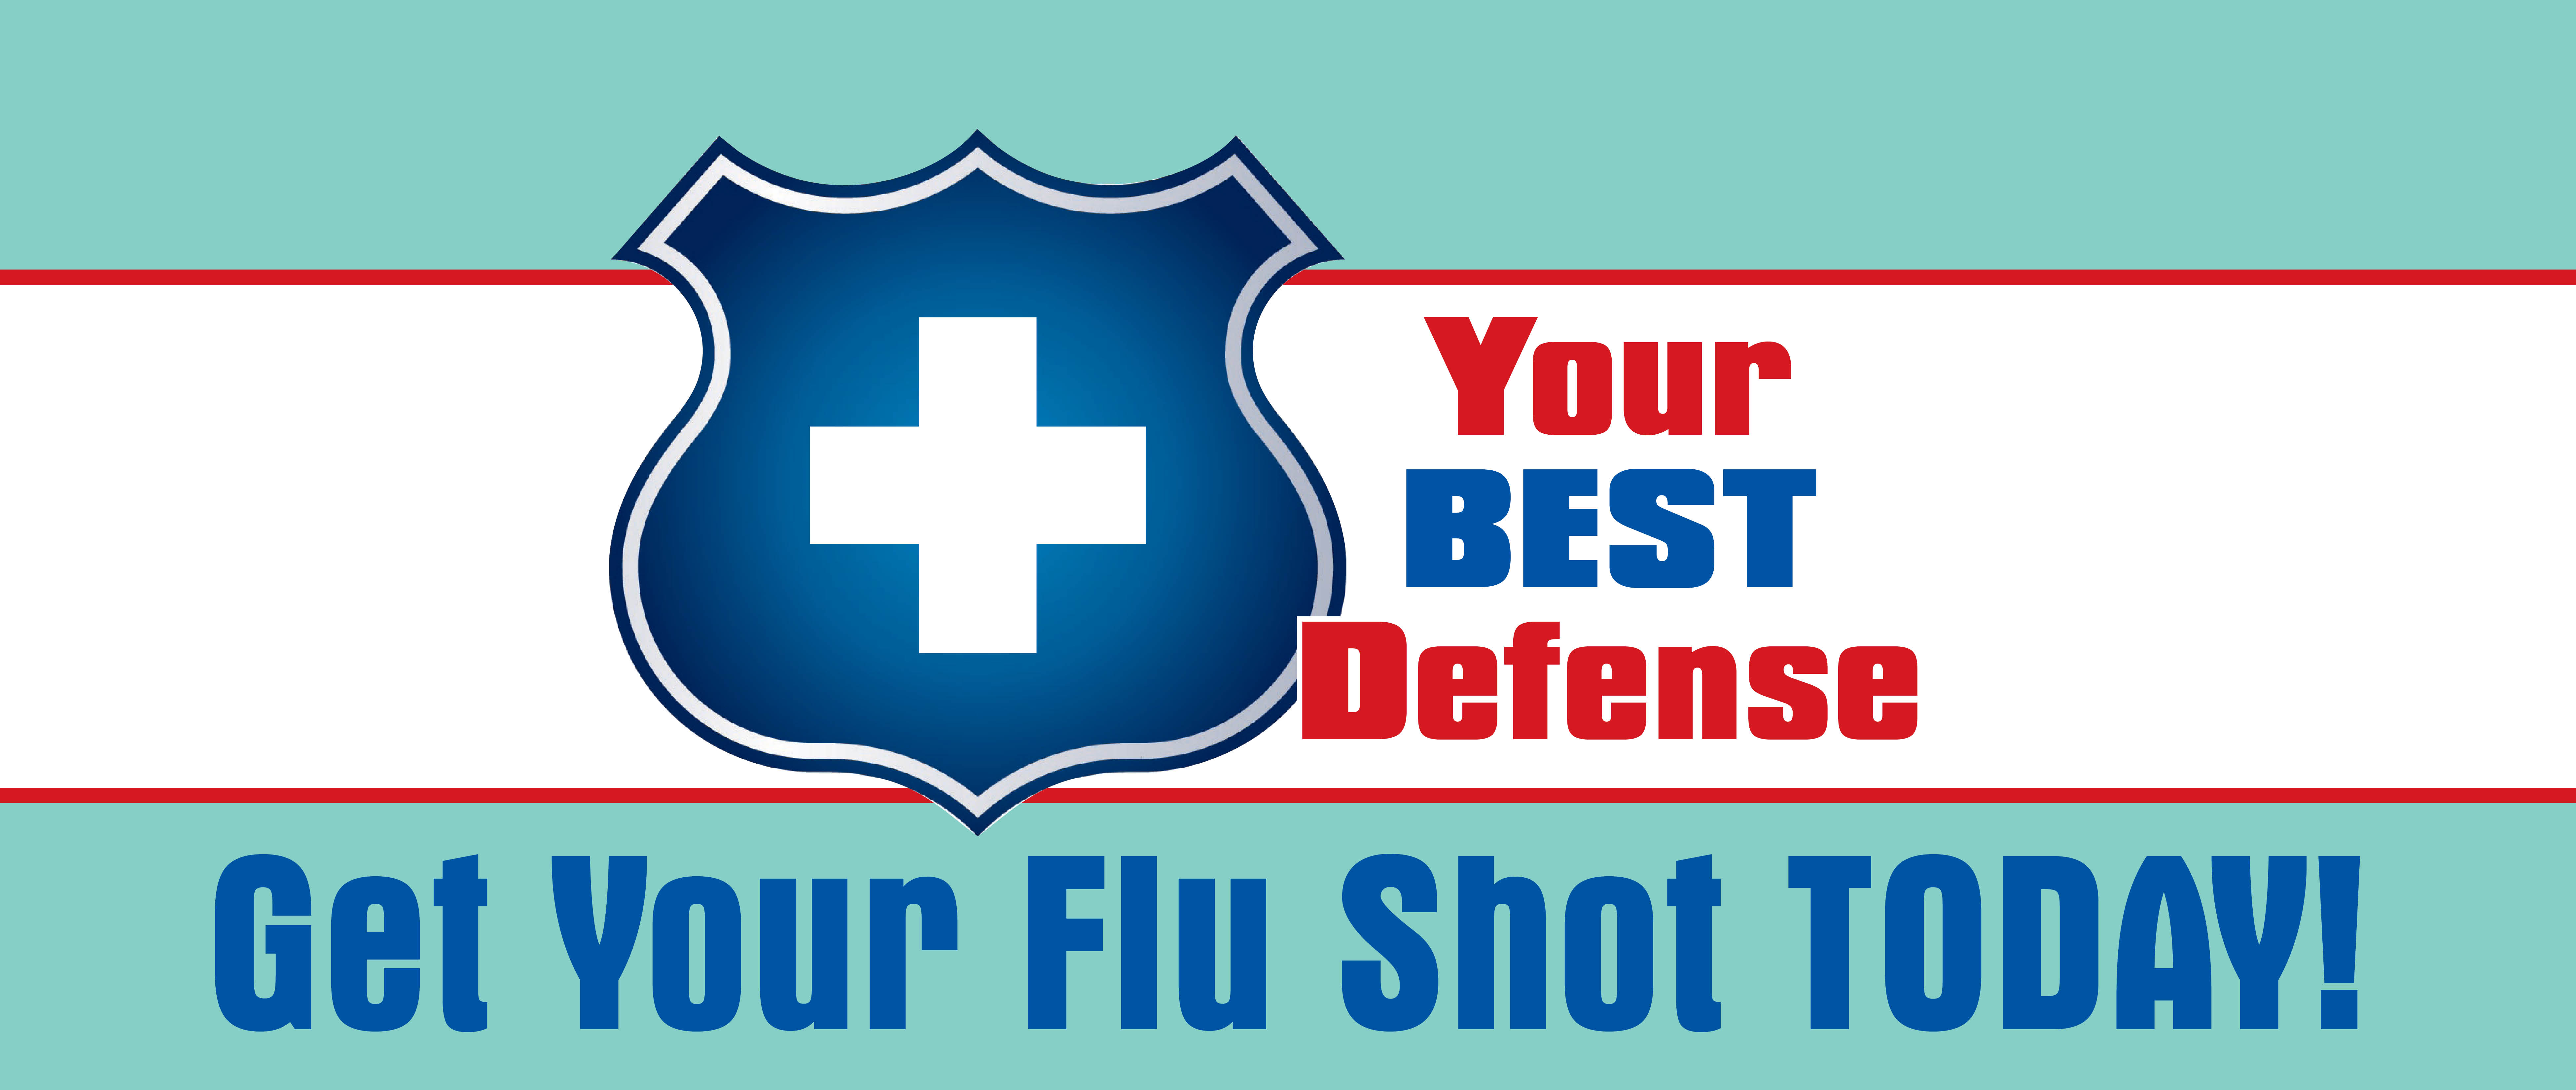 Flu Shots Are Available!